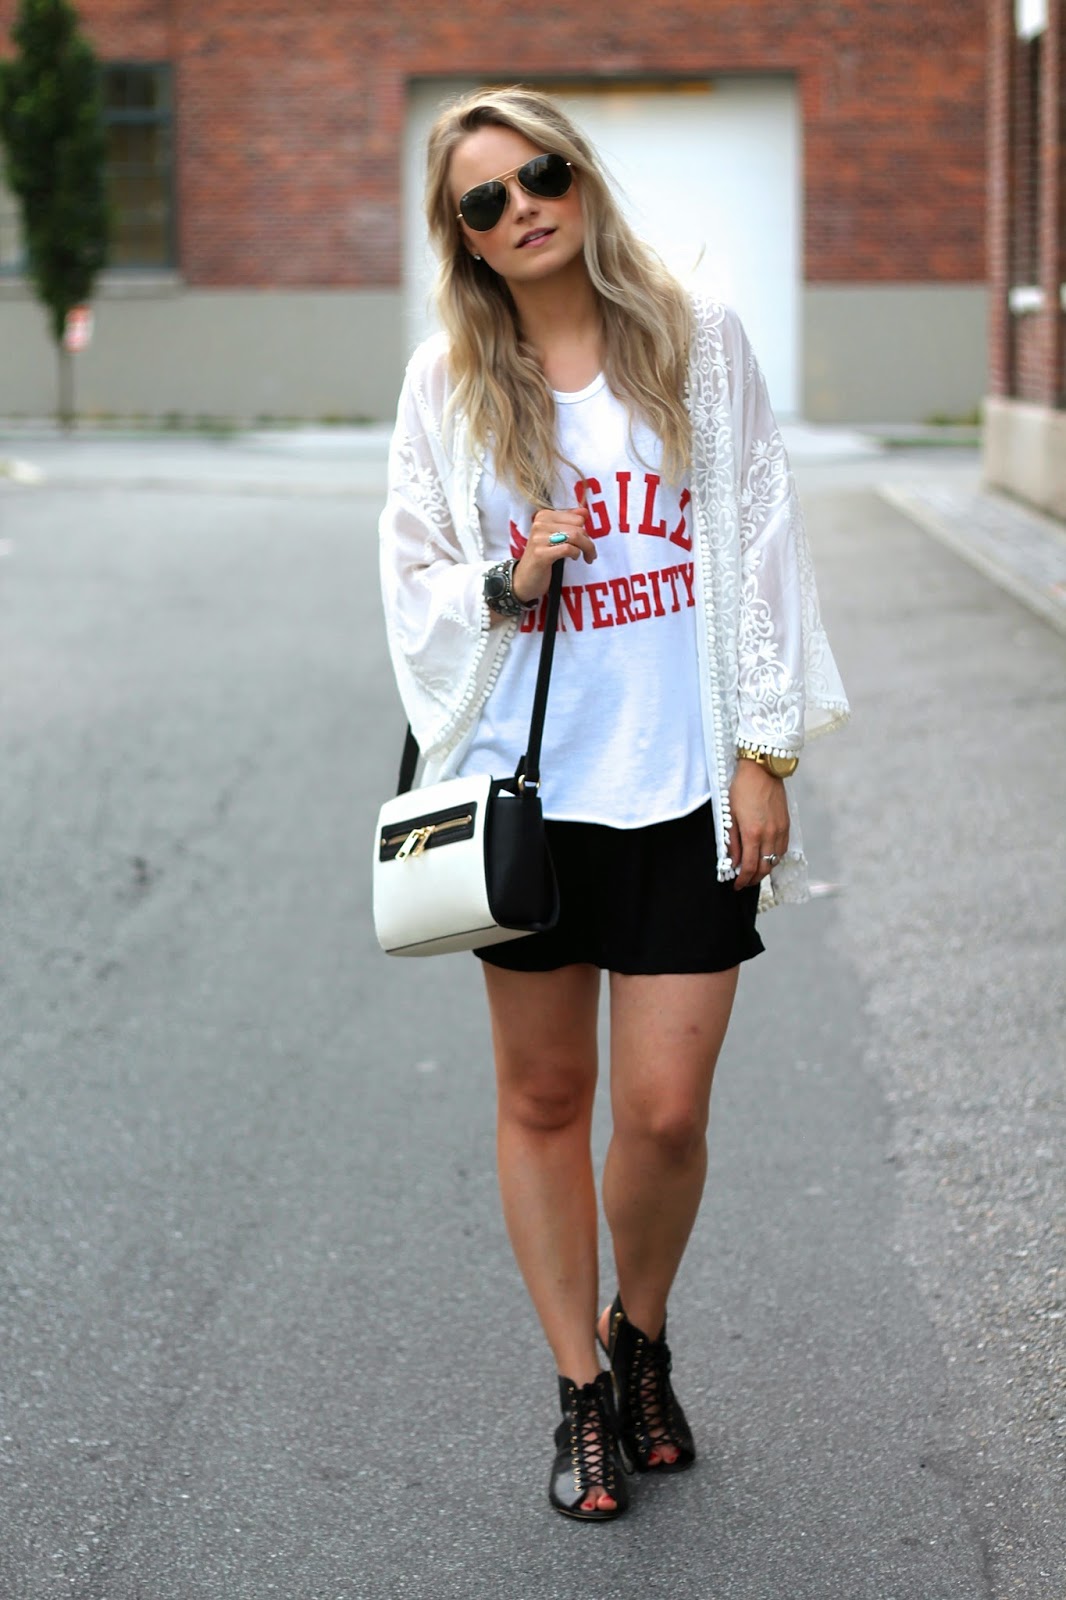 UNIVERSITY TEE AND LACE | ANDREA CLARE